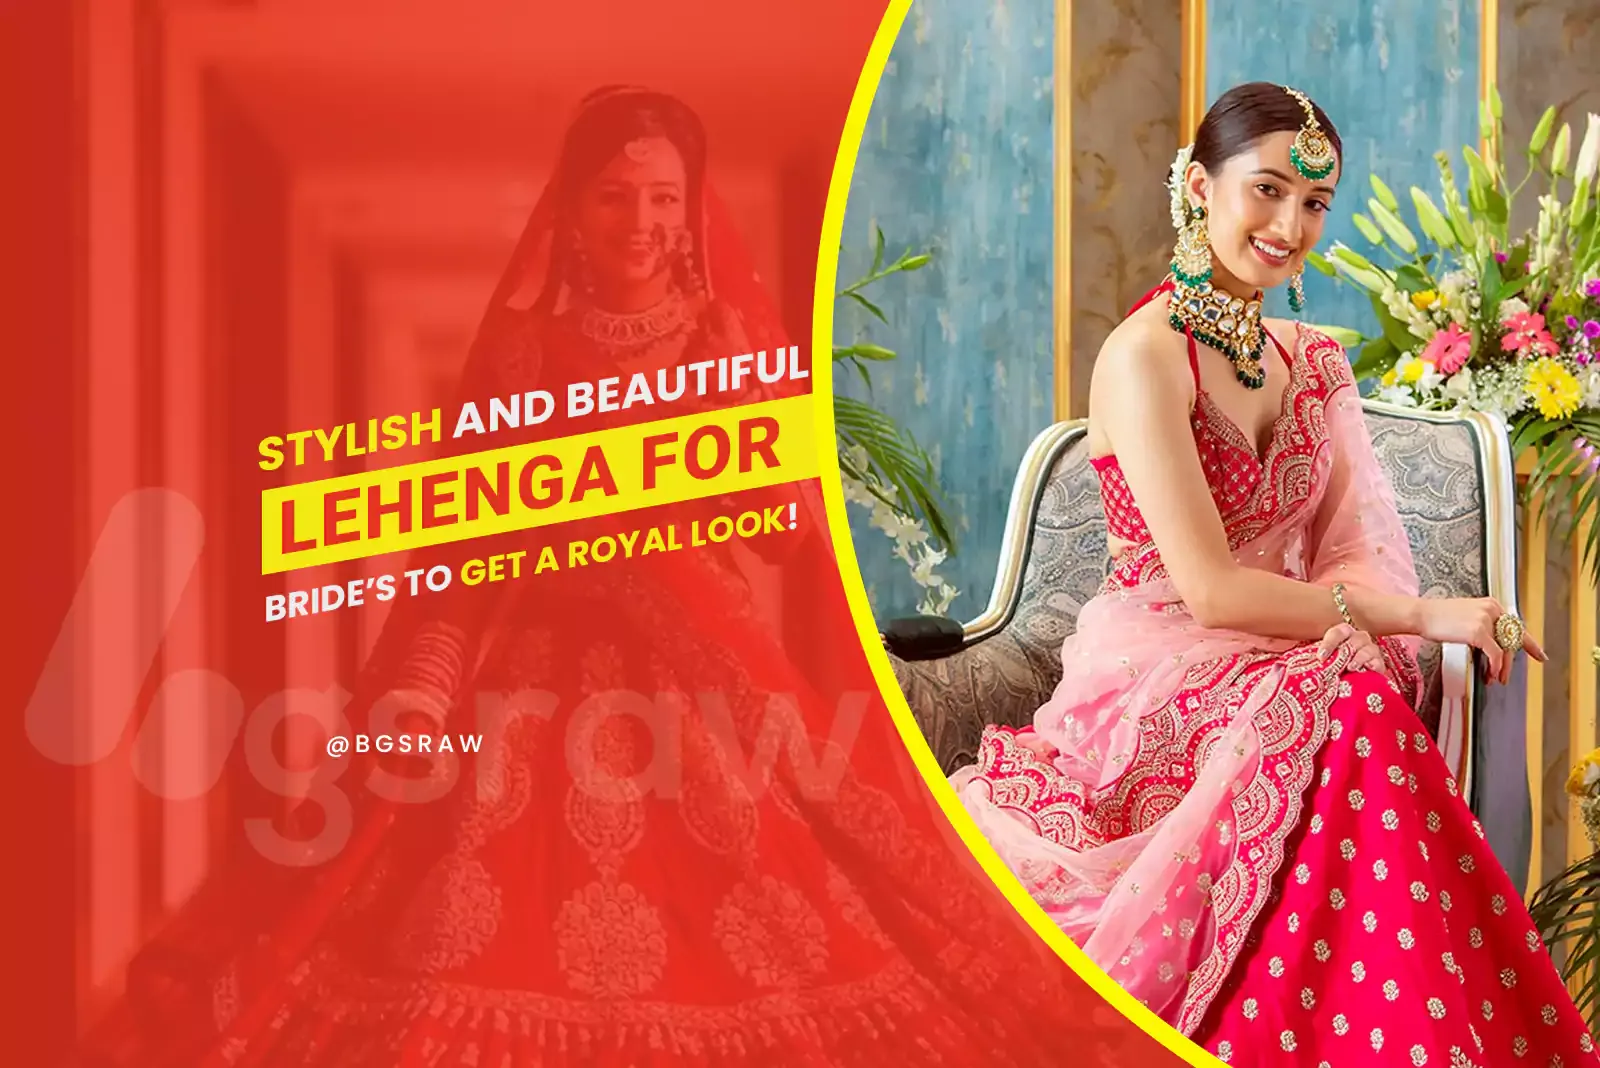 Stylish and Beautiful Lehenga for the Bride to Get a Royal Look